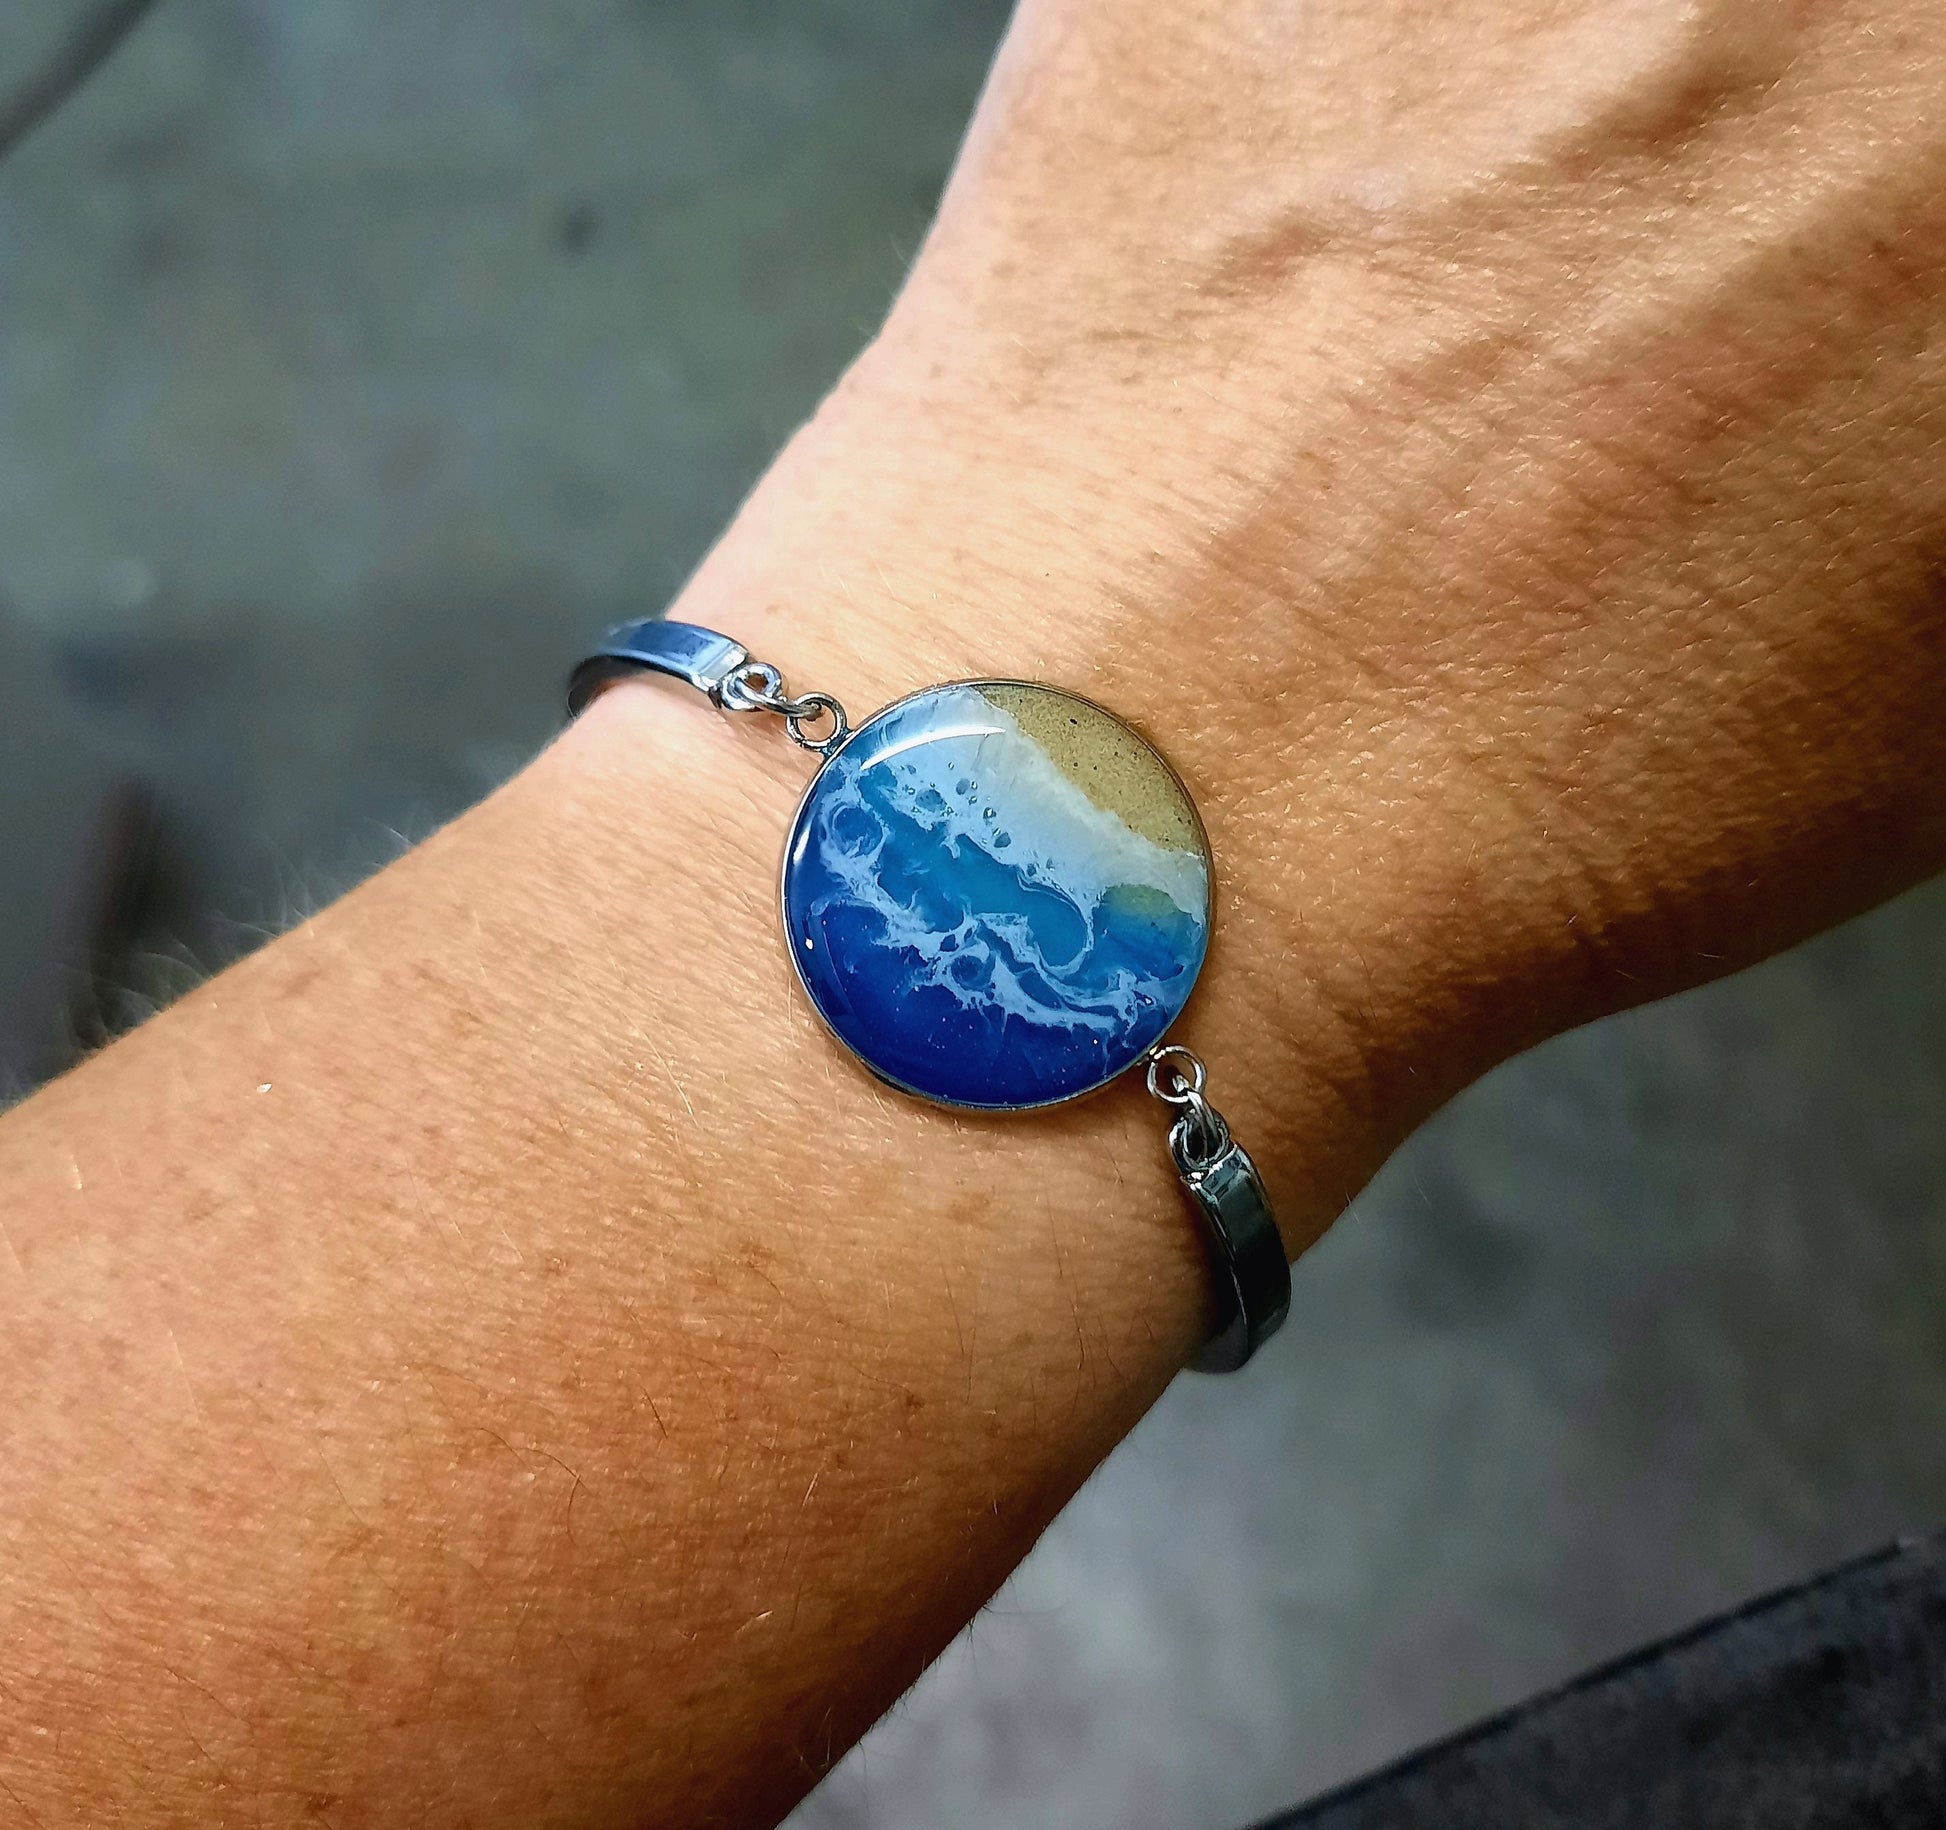 Resin Waves Ocean Bracelet / Beach Scene, Silver Stainless Steel, Adjustable Bracelet Made with Real Sand, Resin, & Mica - NOT A PHOTOGRAPH!